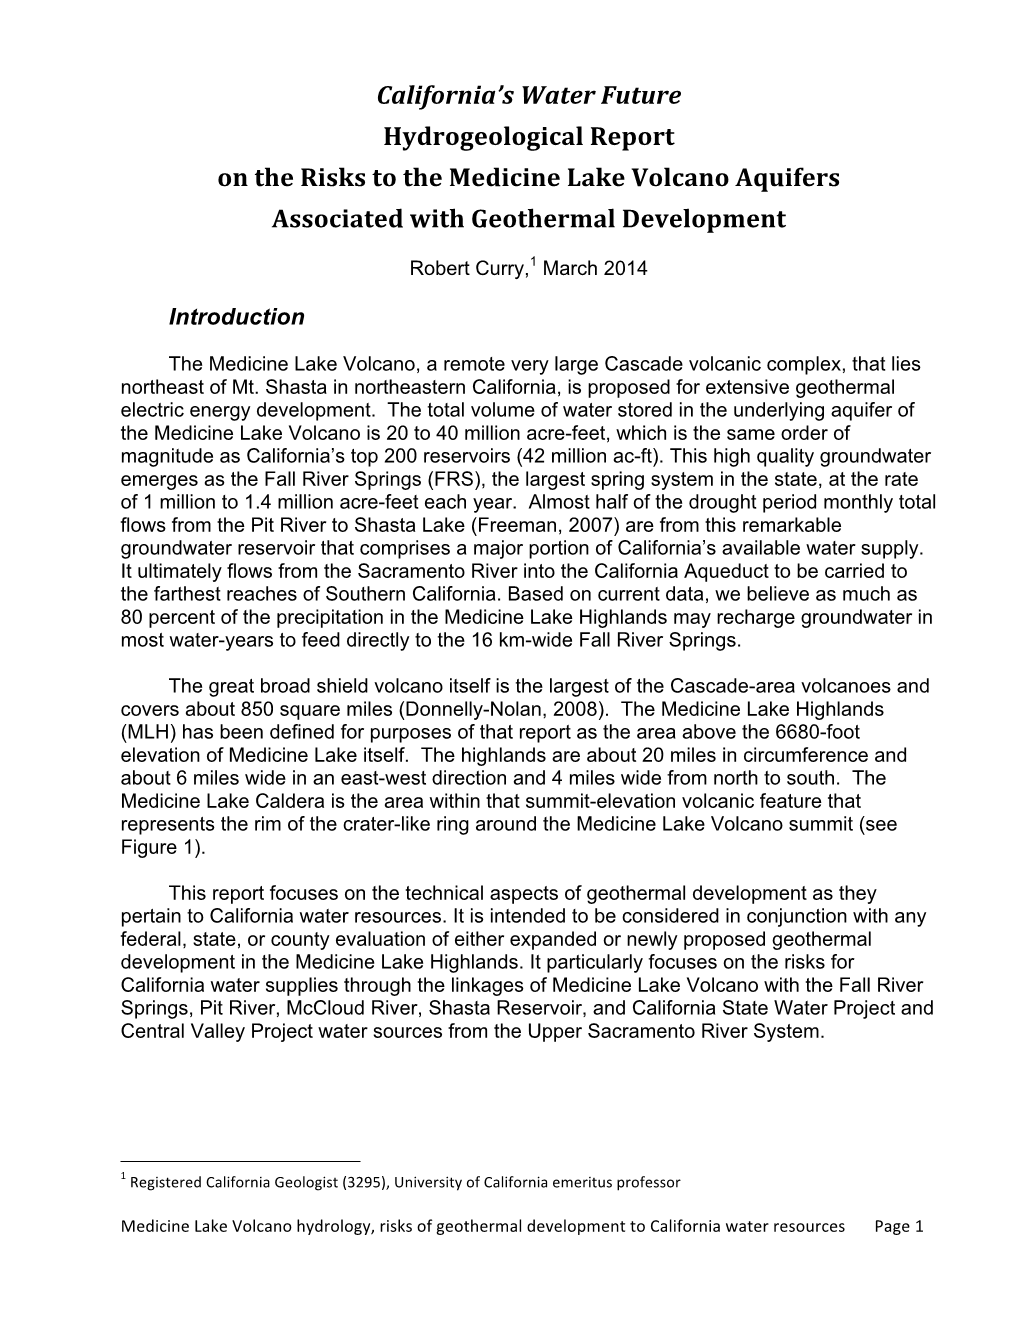 Hydrogeological Report on the Risks to the Medicine Lake Volcano